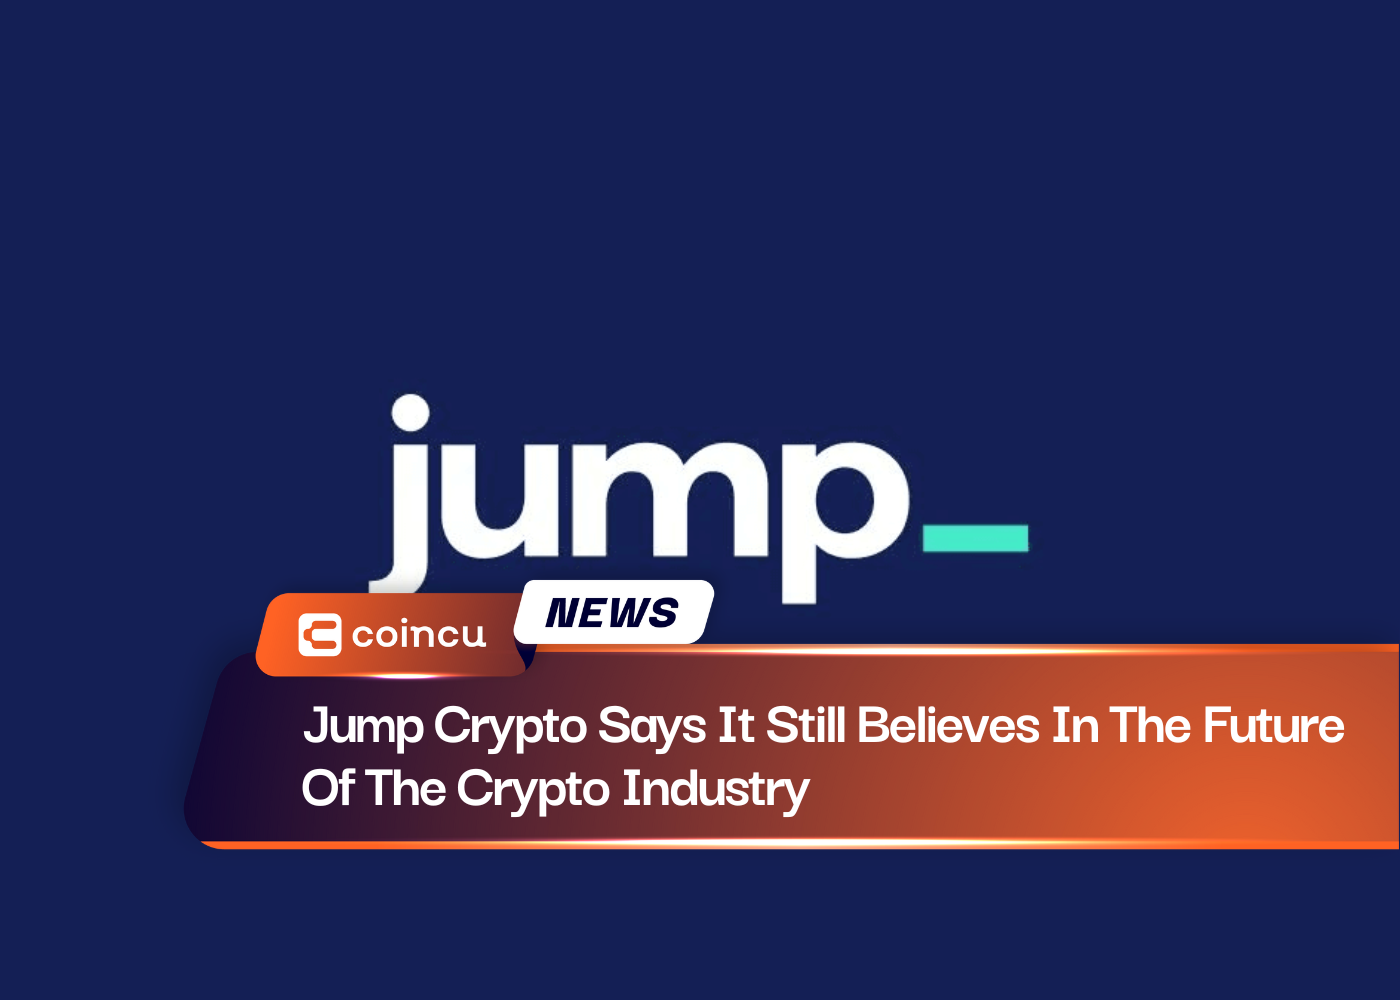 Jump Crypto Says It Still Believes In The Future Of The Crypto Industry